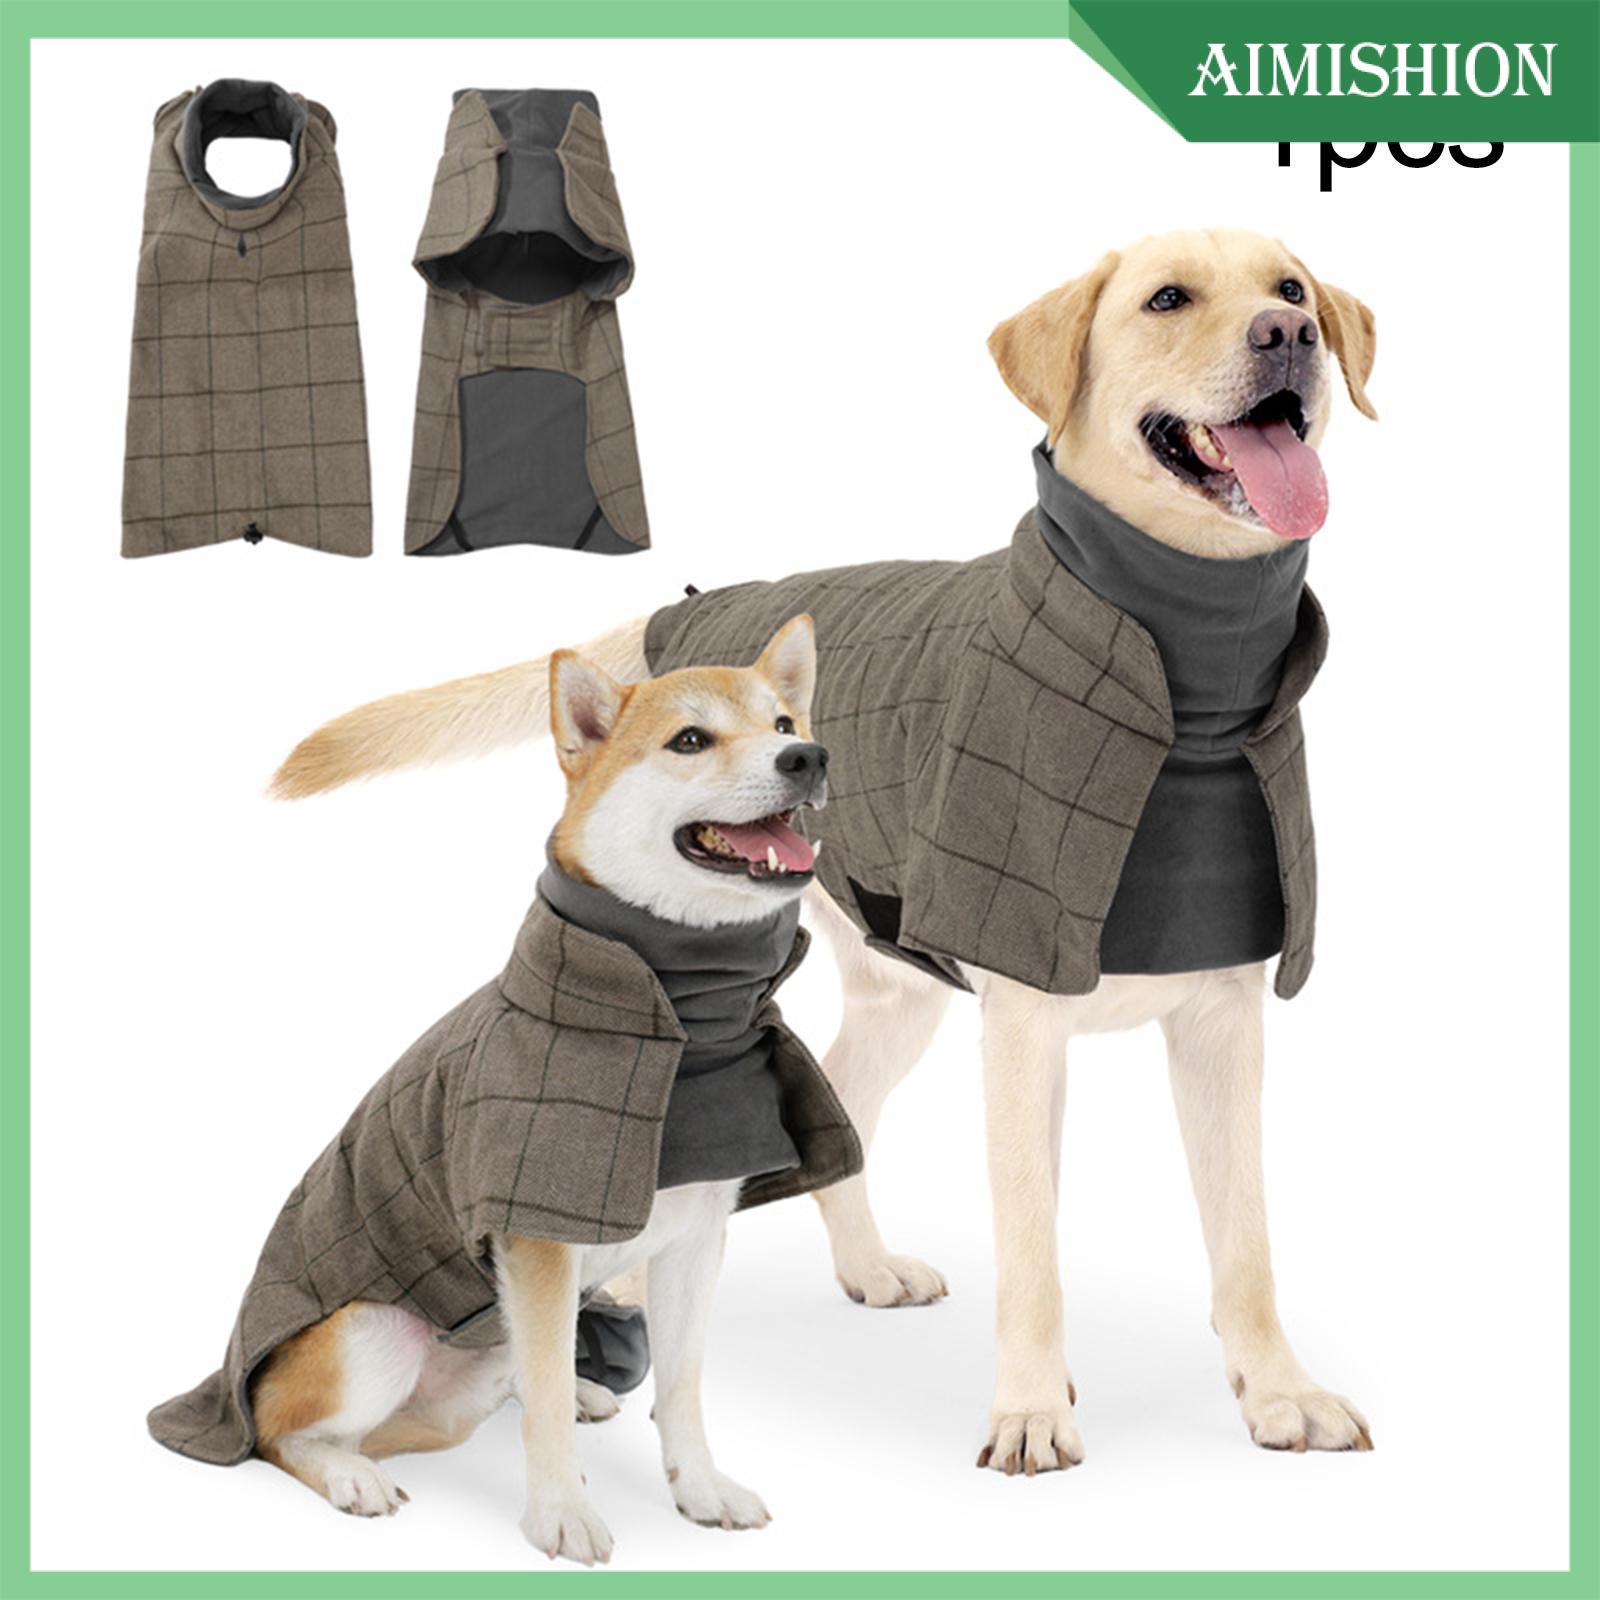 Aimishion Dog Coat Windproof for Cold Weather Warm Dog Jackets for Park